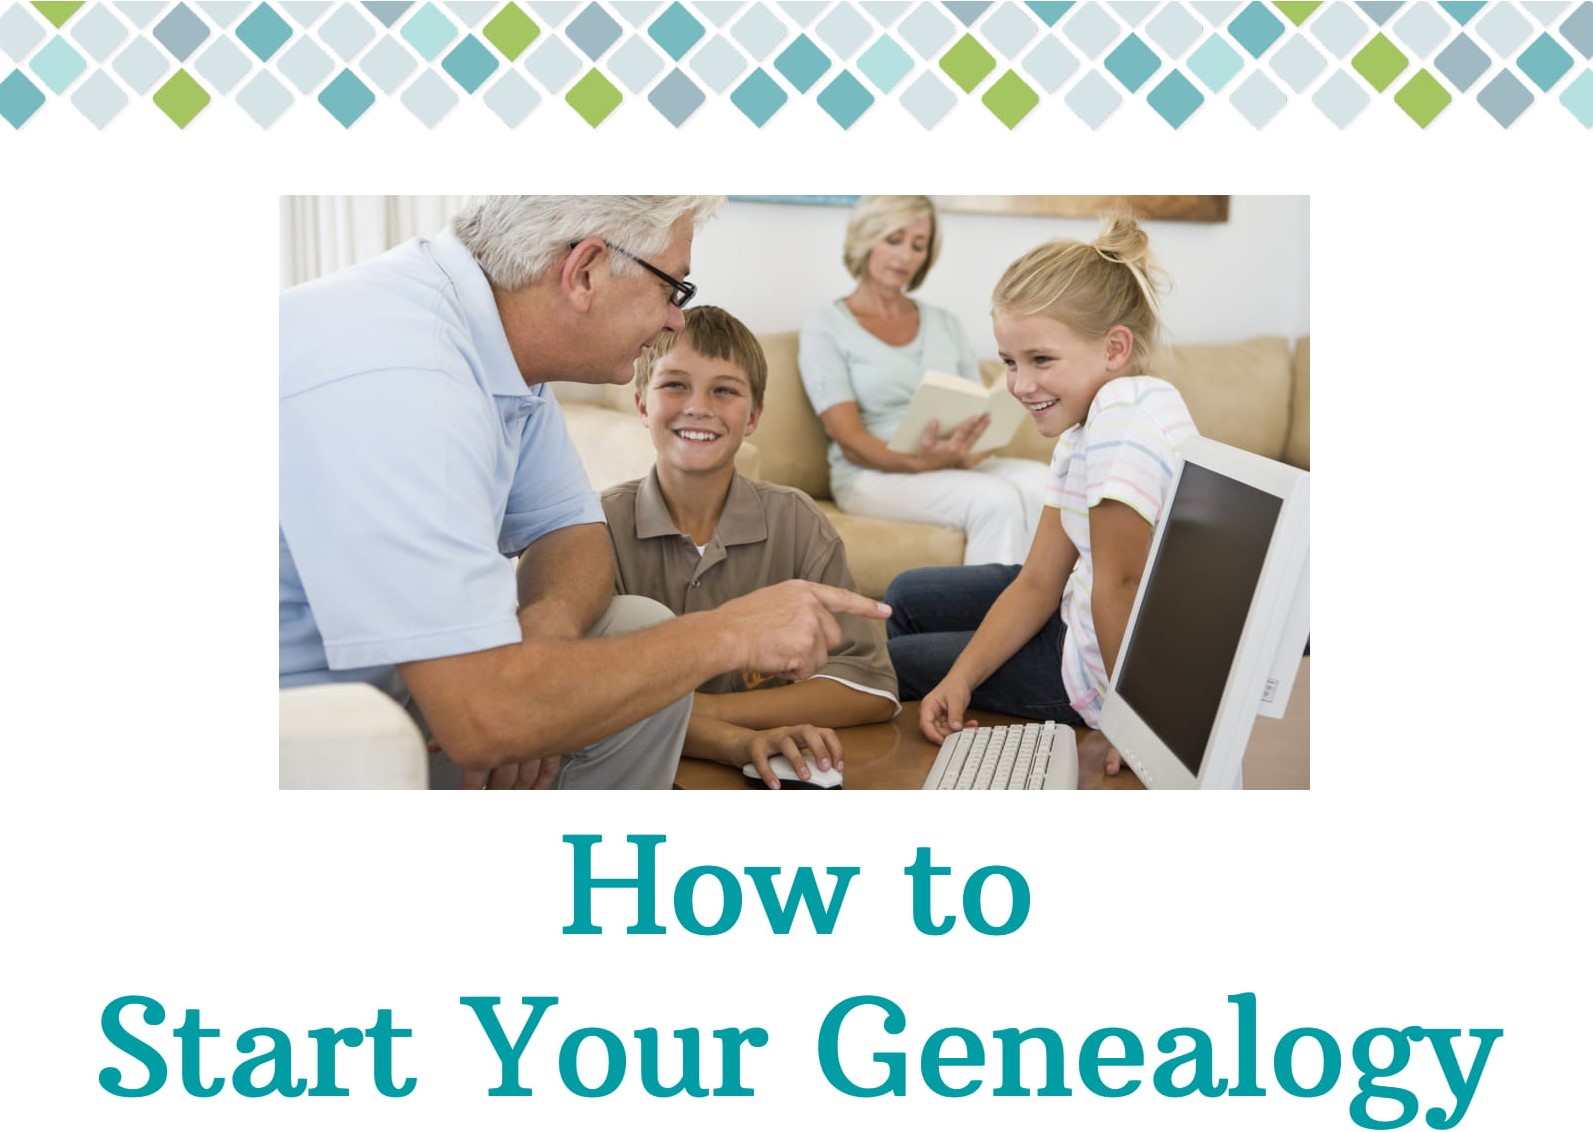 How to start your genealogy